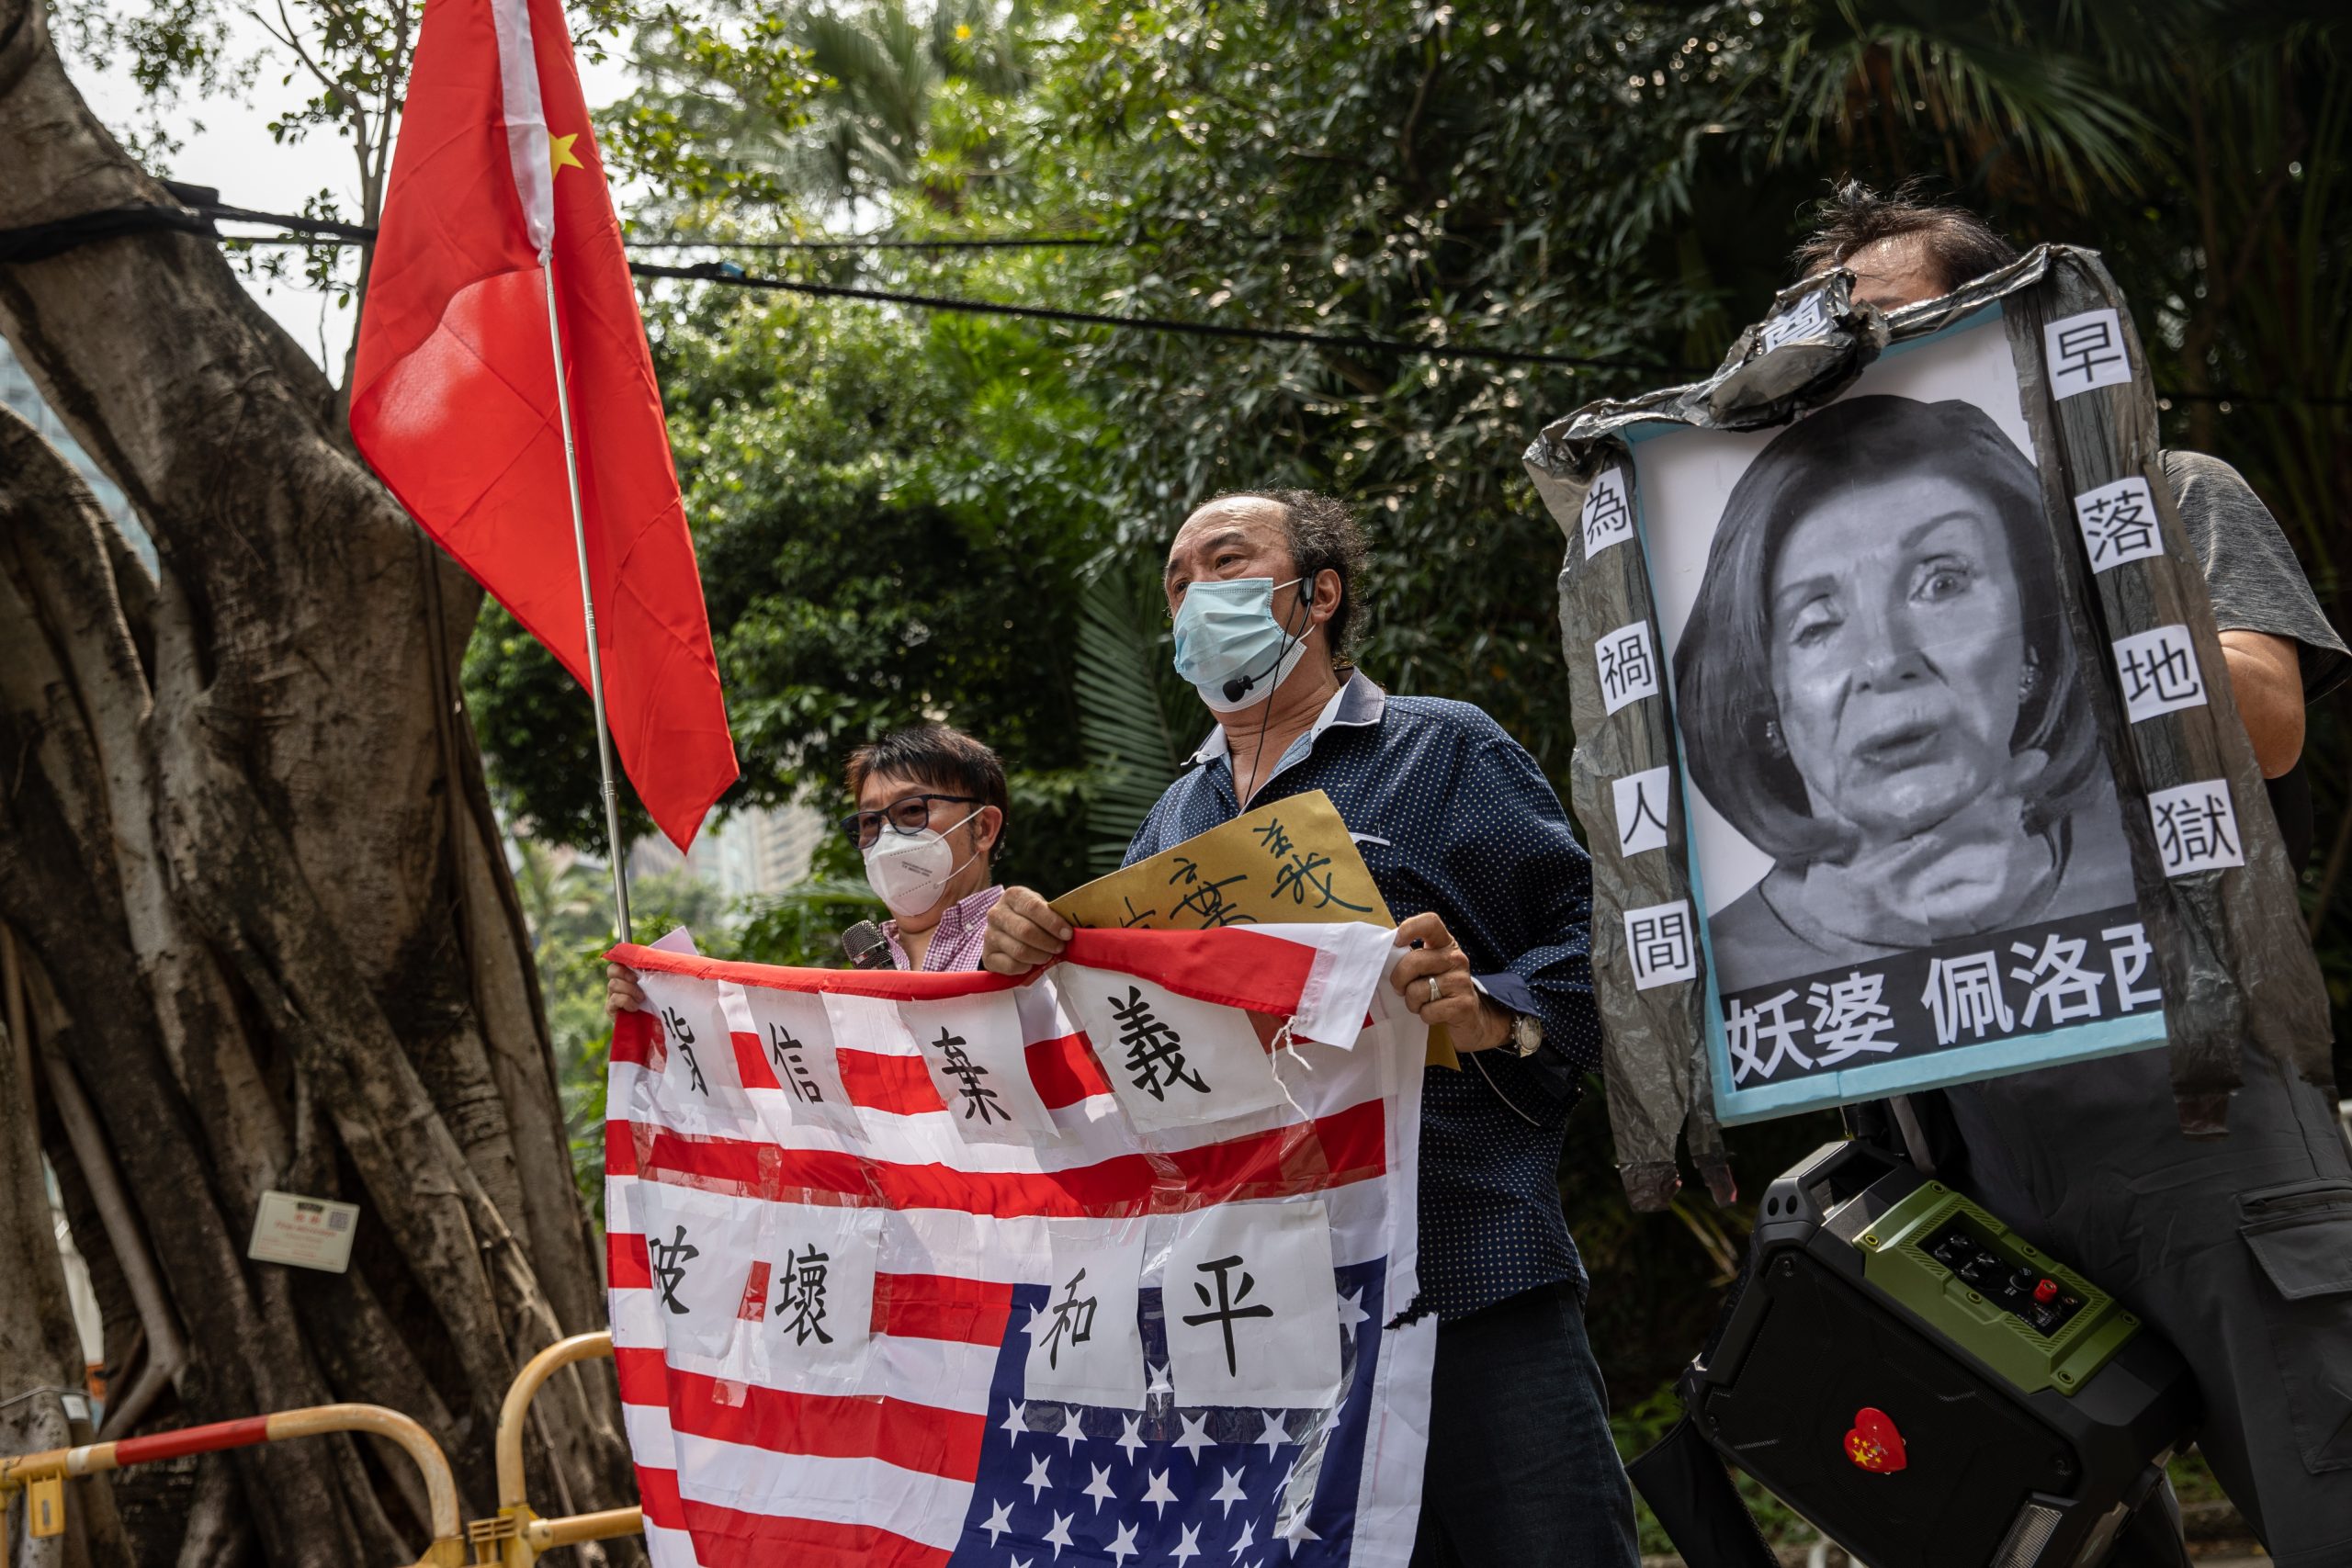 epa10103680 A group of pro-China supporters displays a mock up funeral photo of the US House Speaker Nancy Pelosi and an inverted US flag outside of the US Consulate General in Hong Kong and Macau, in Hong Kong, China, 03 August 2022. The group protested the visit to Taiwan by Nancy Pelosi who is leading a Congressional delegation to the Indo-Pacific region with stops in Singapore, Malaysia, South Korea and Japan.  EPA/JEROME FAVRE